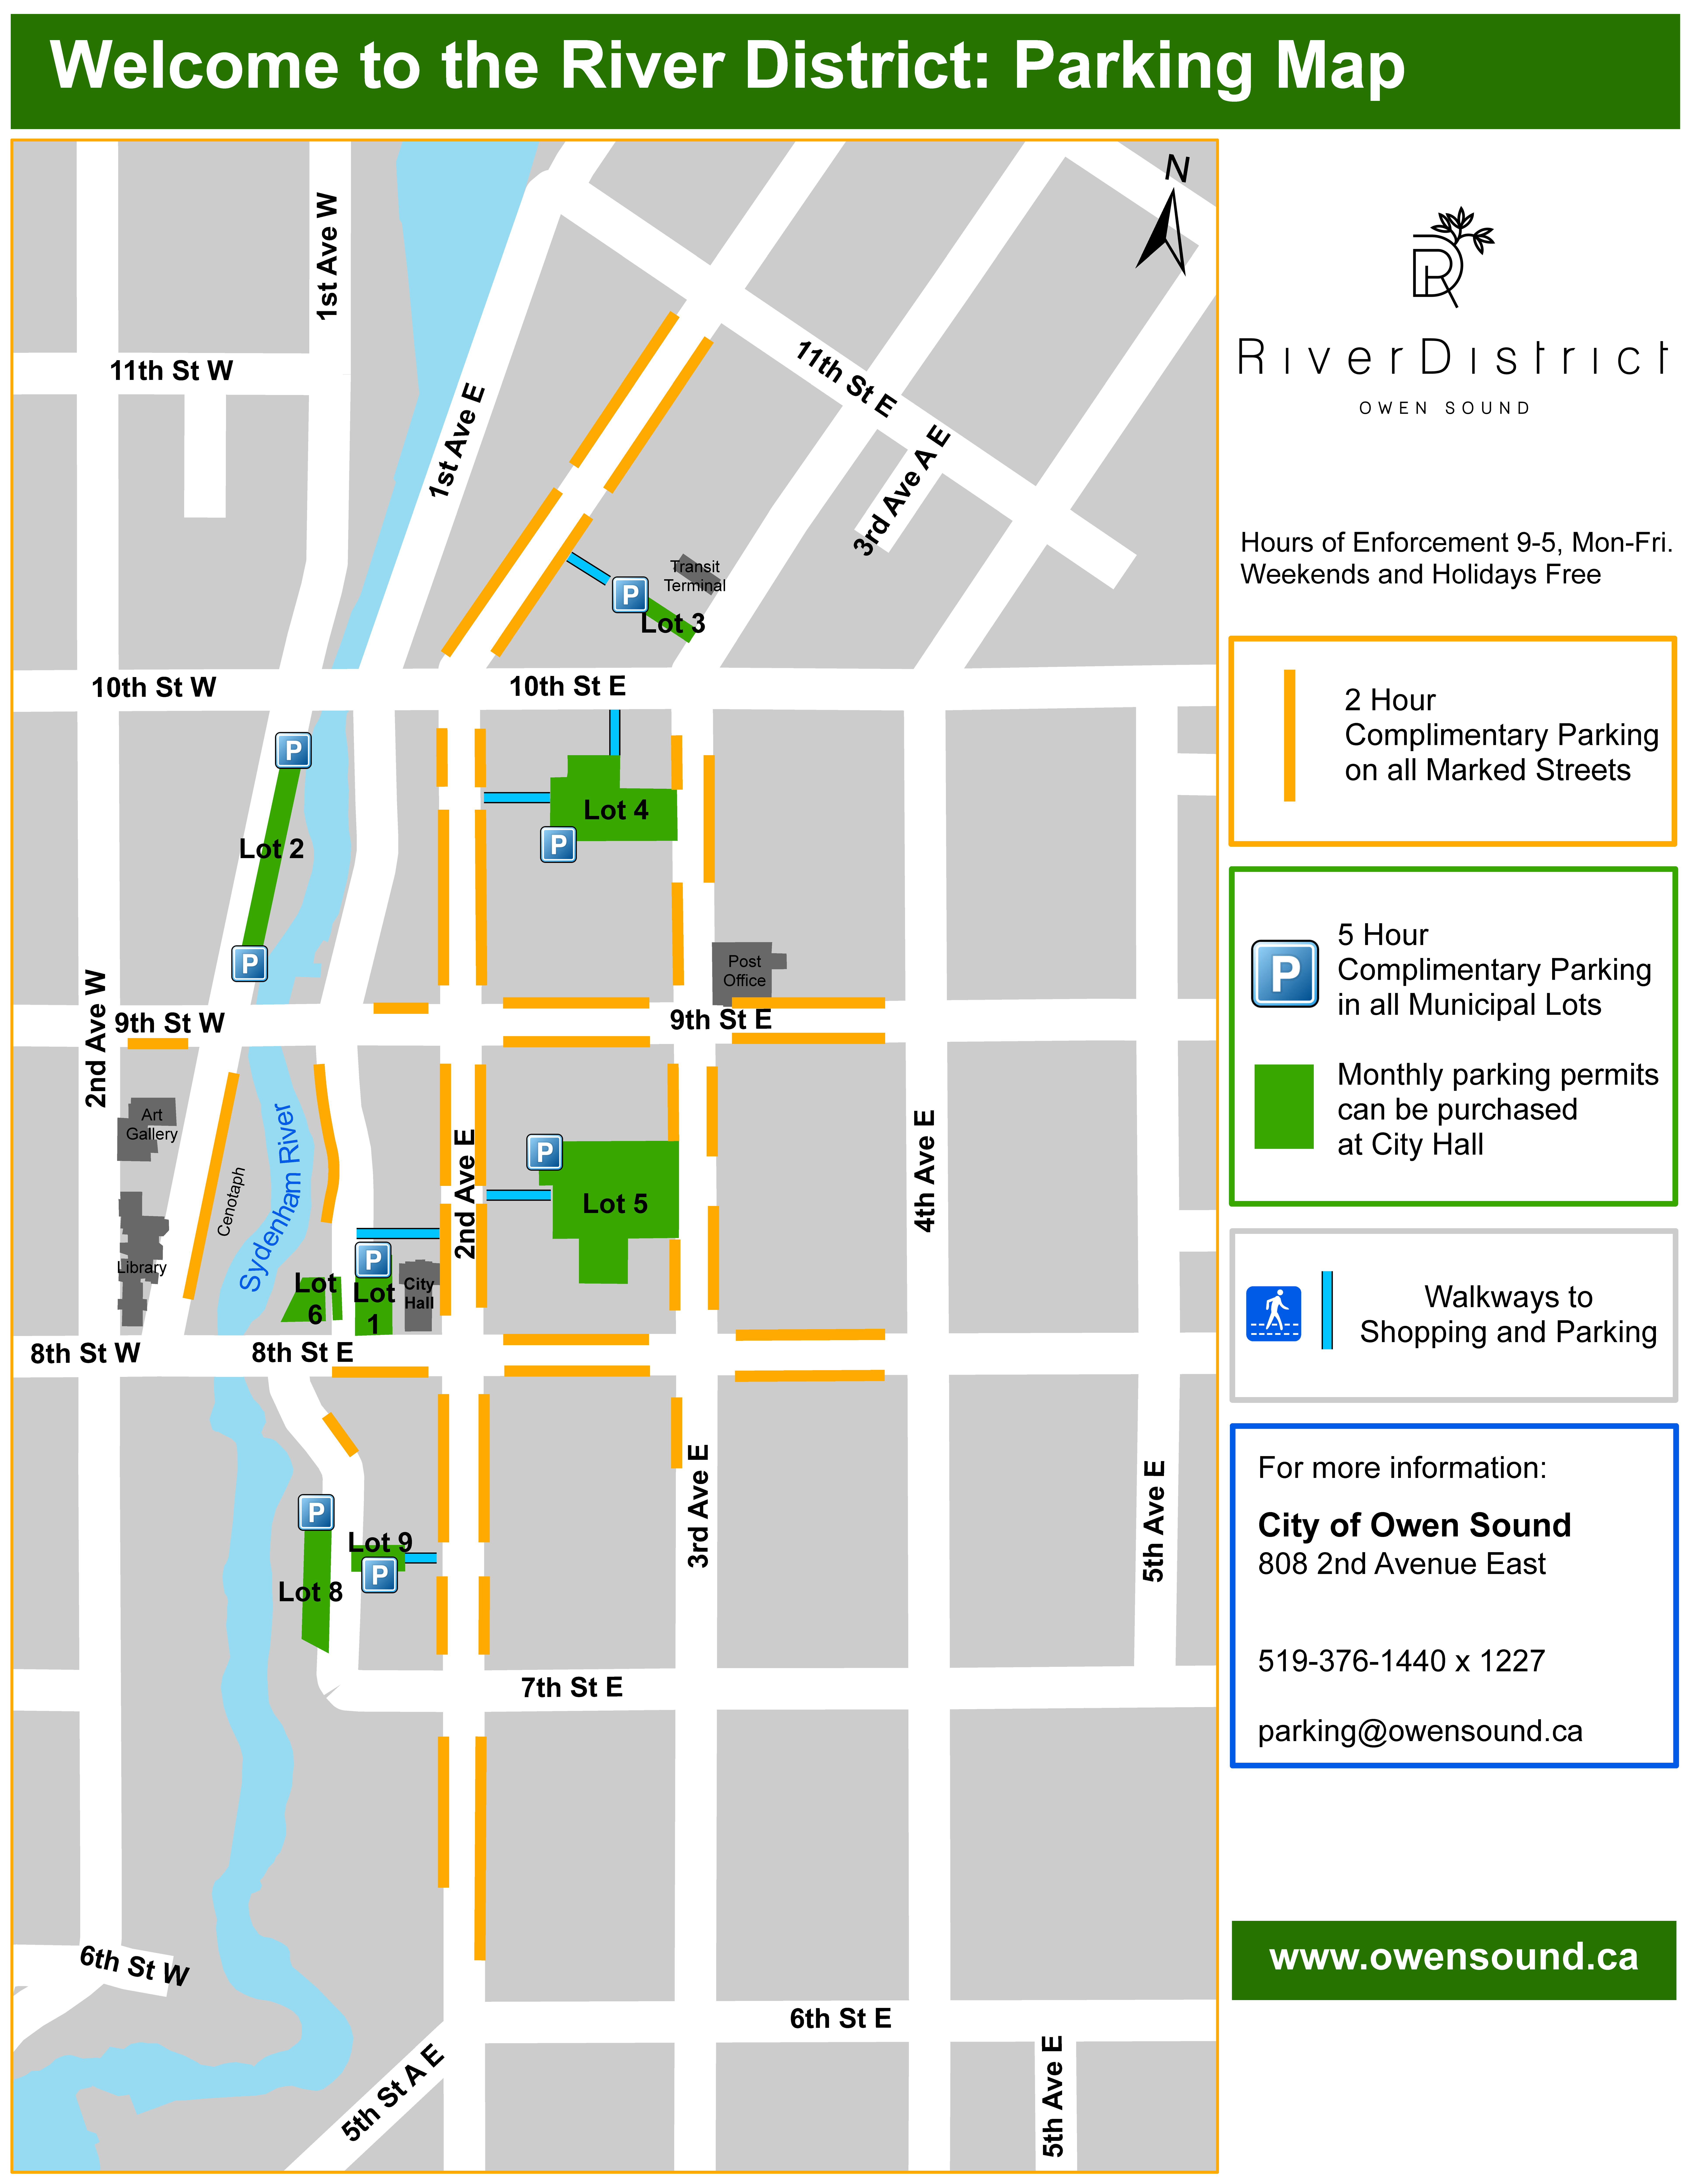 Image of River District Municipal Parking Lot Closures for One World Festival